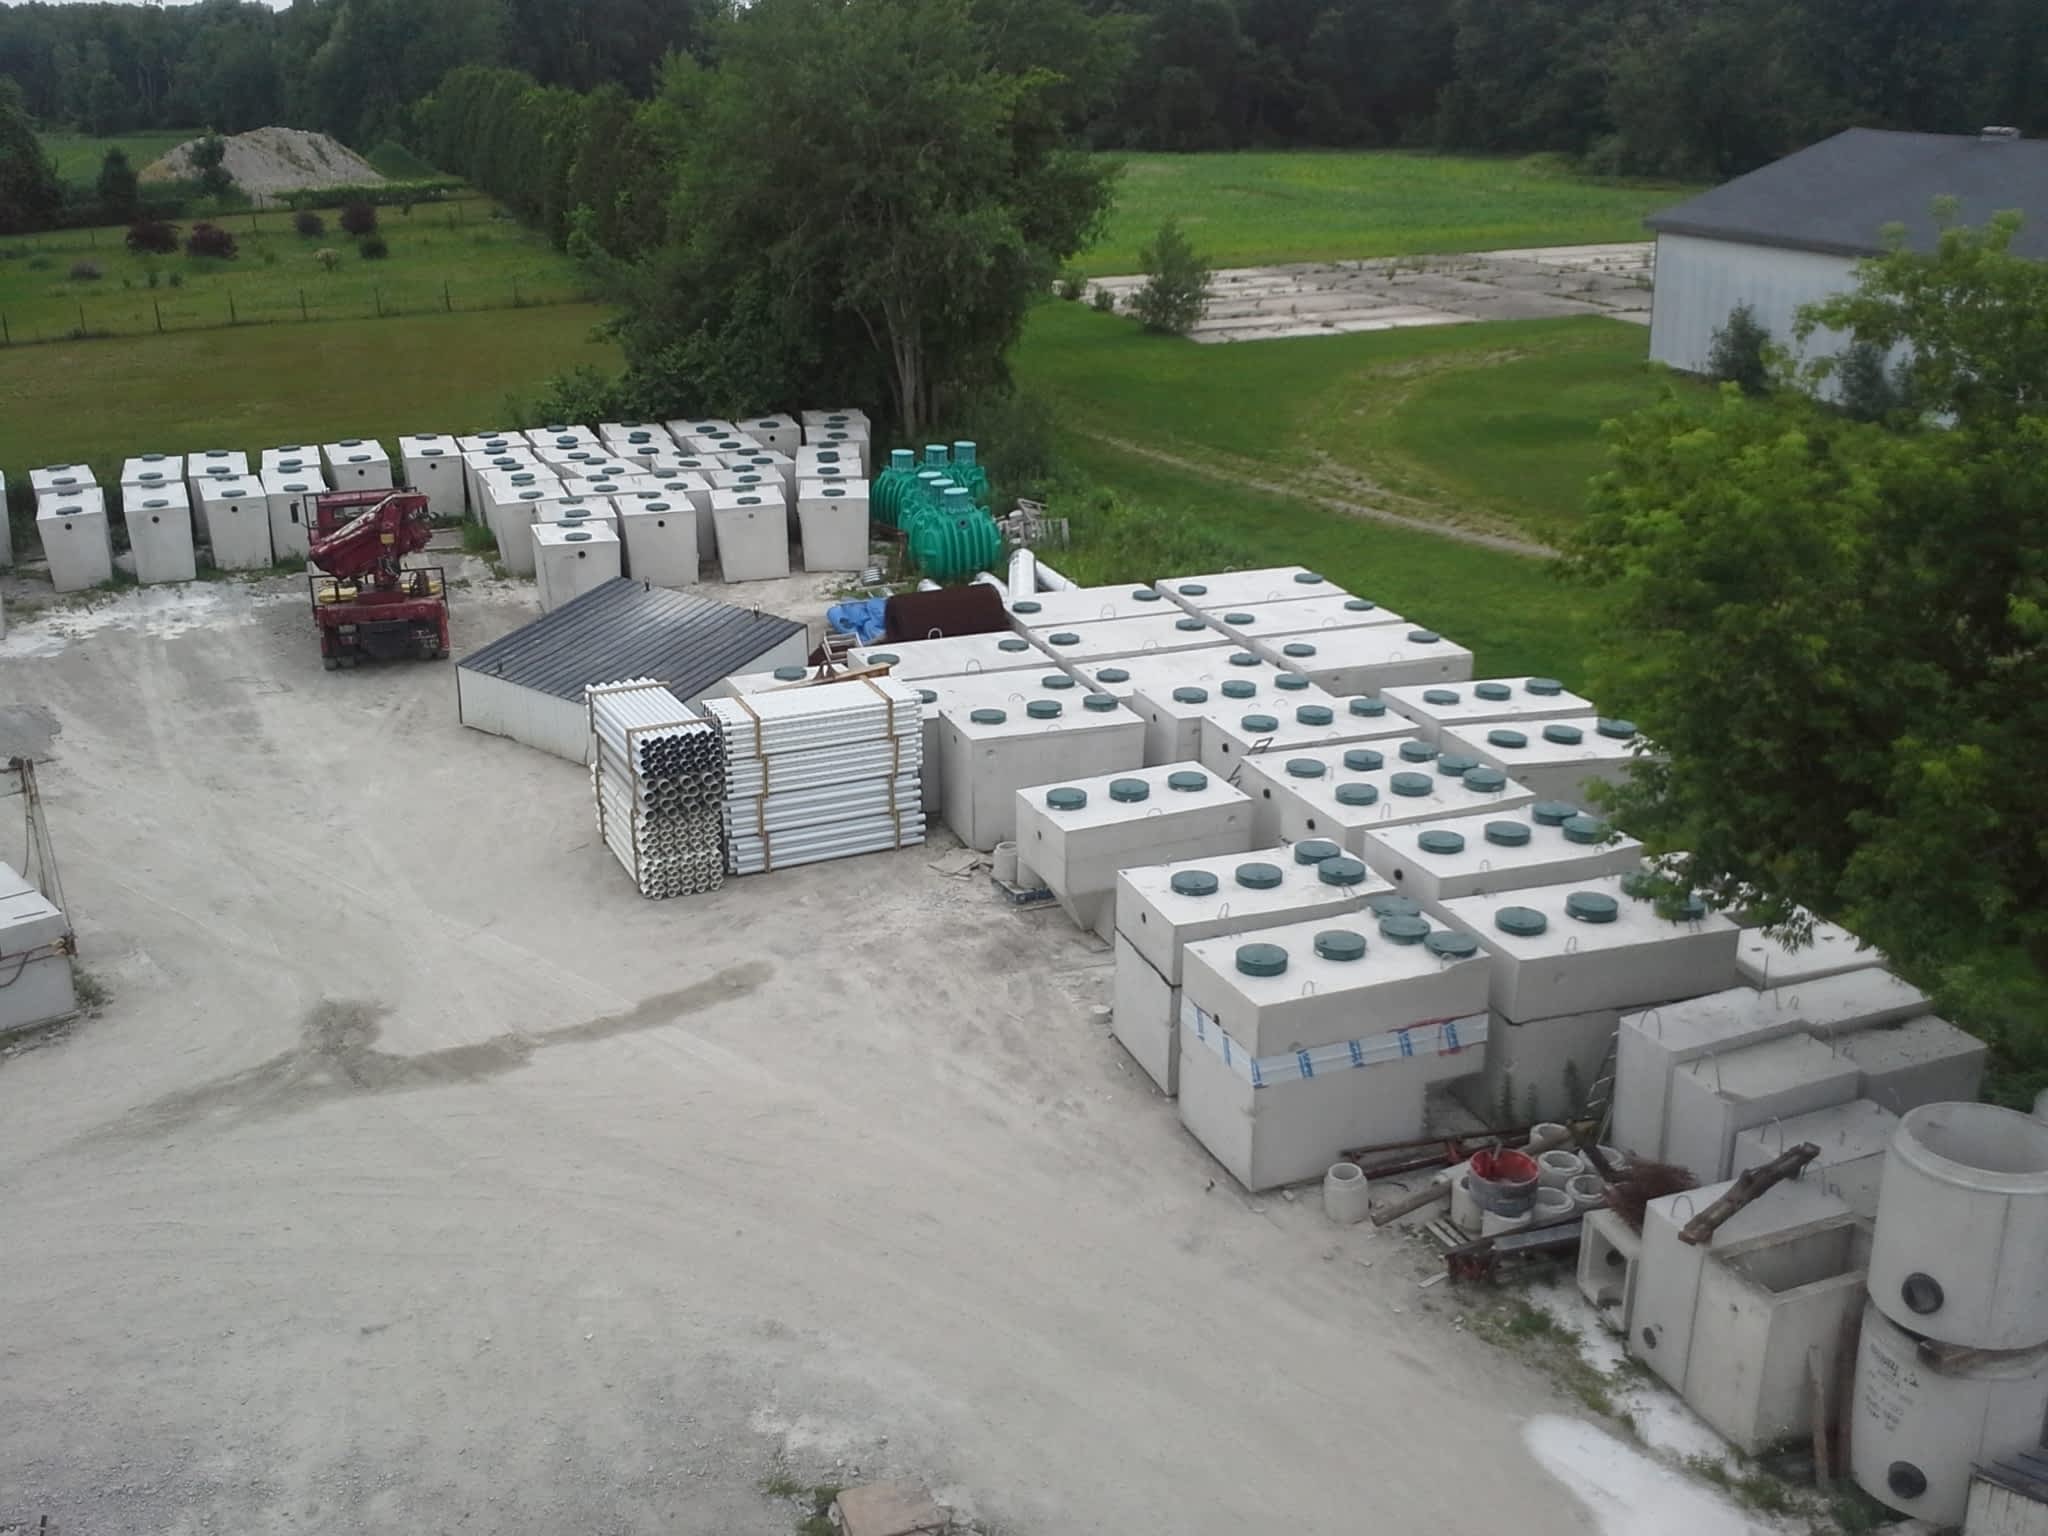 photo Roswell Concrete Products